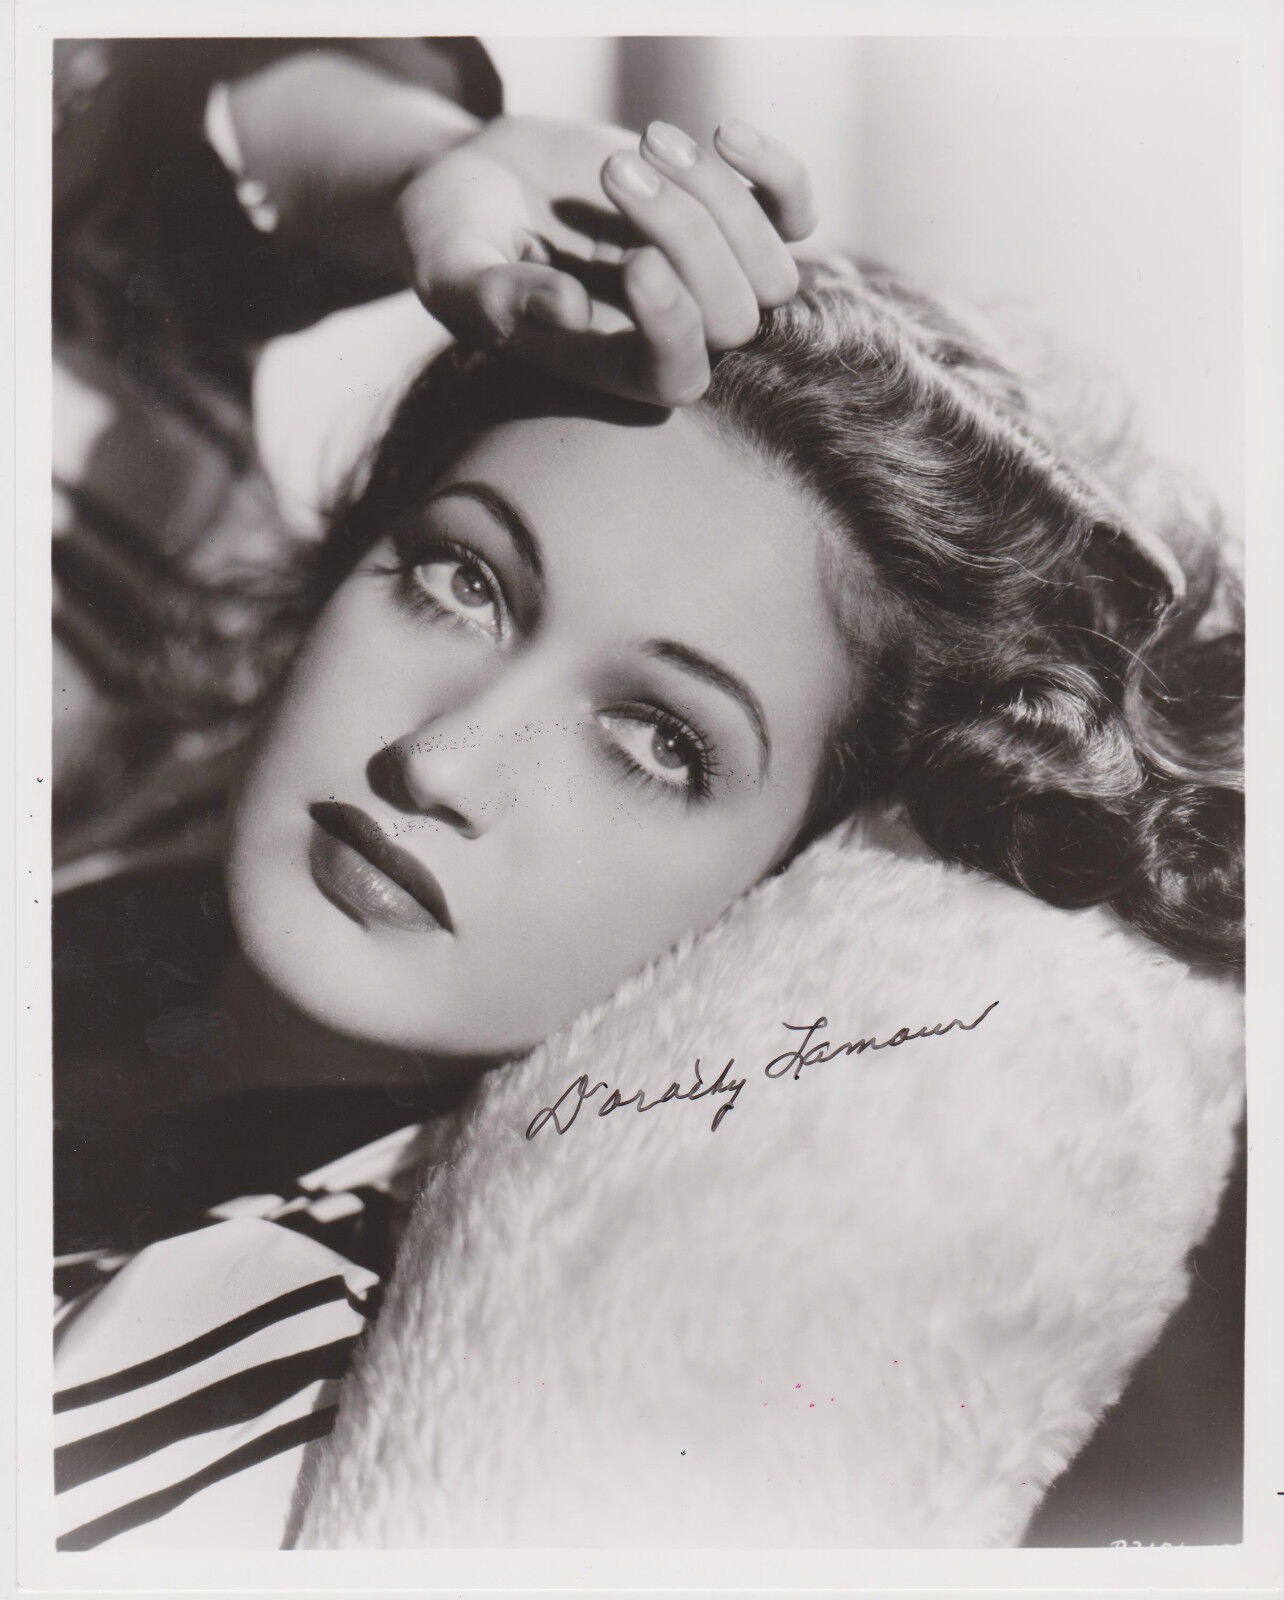 SIGNED DOROTHY LAMOUR 8X10 PHOTO - FROM HER PERSONAL COLLECTION